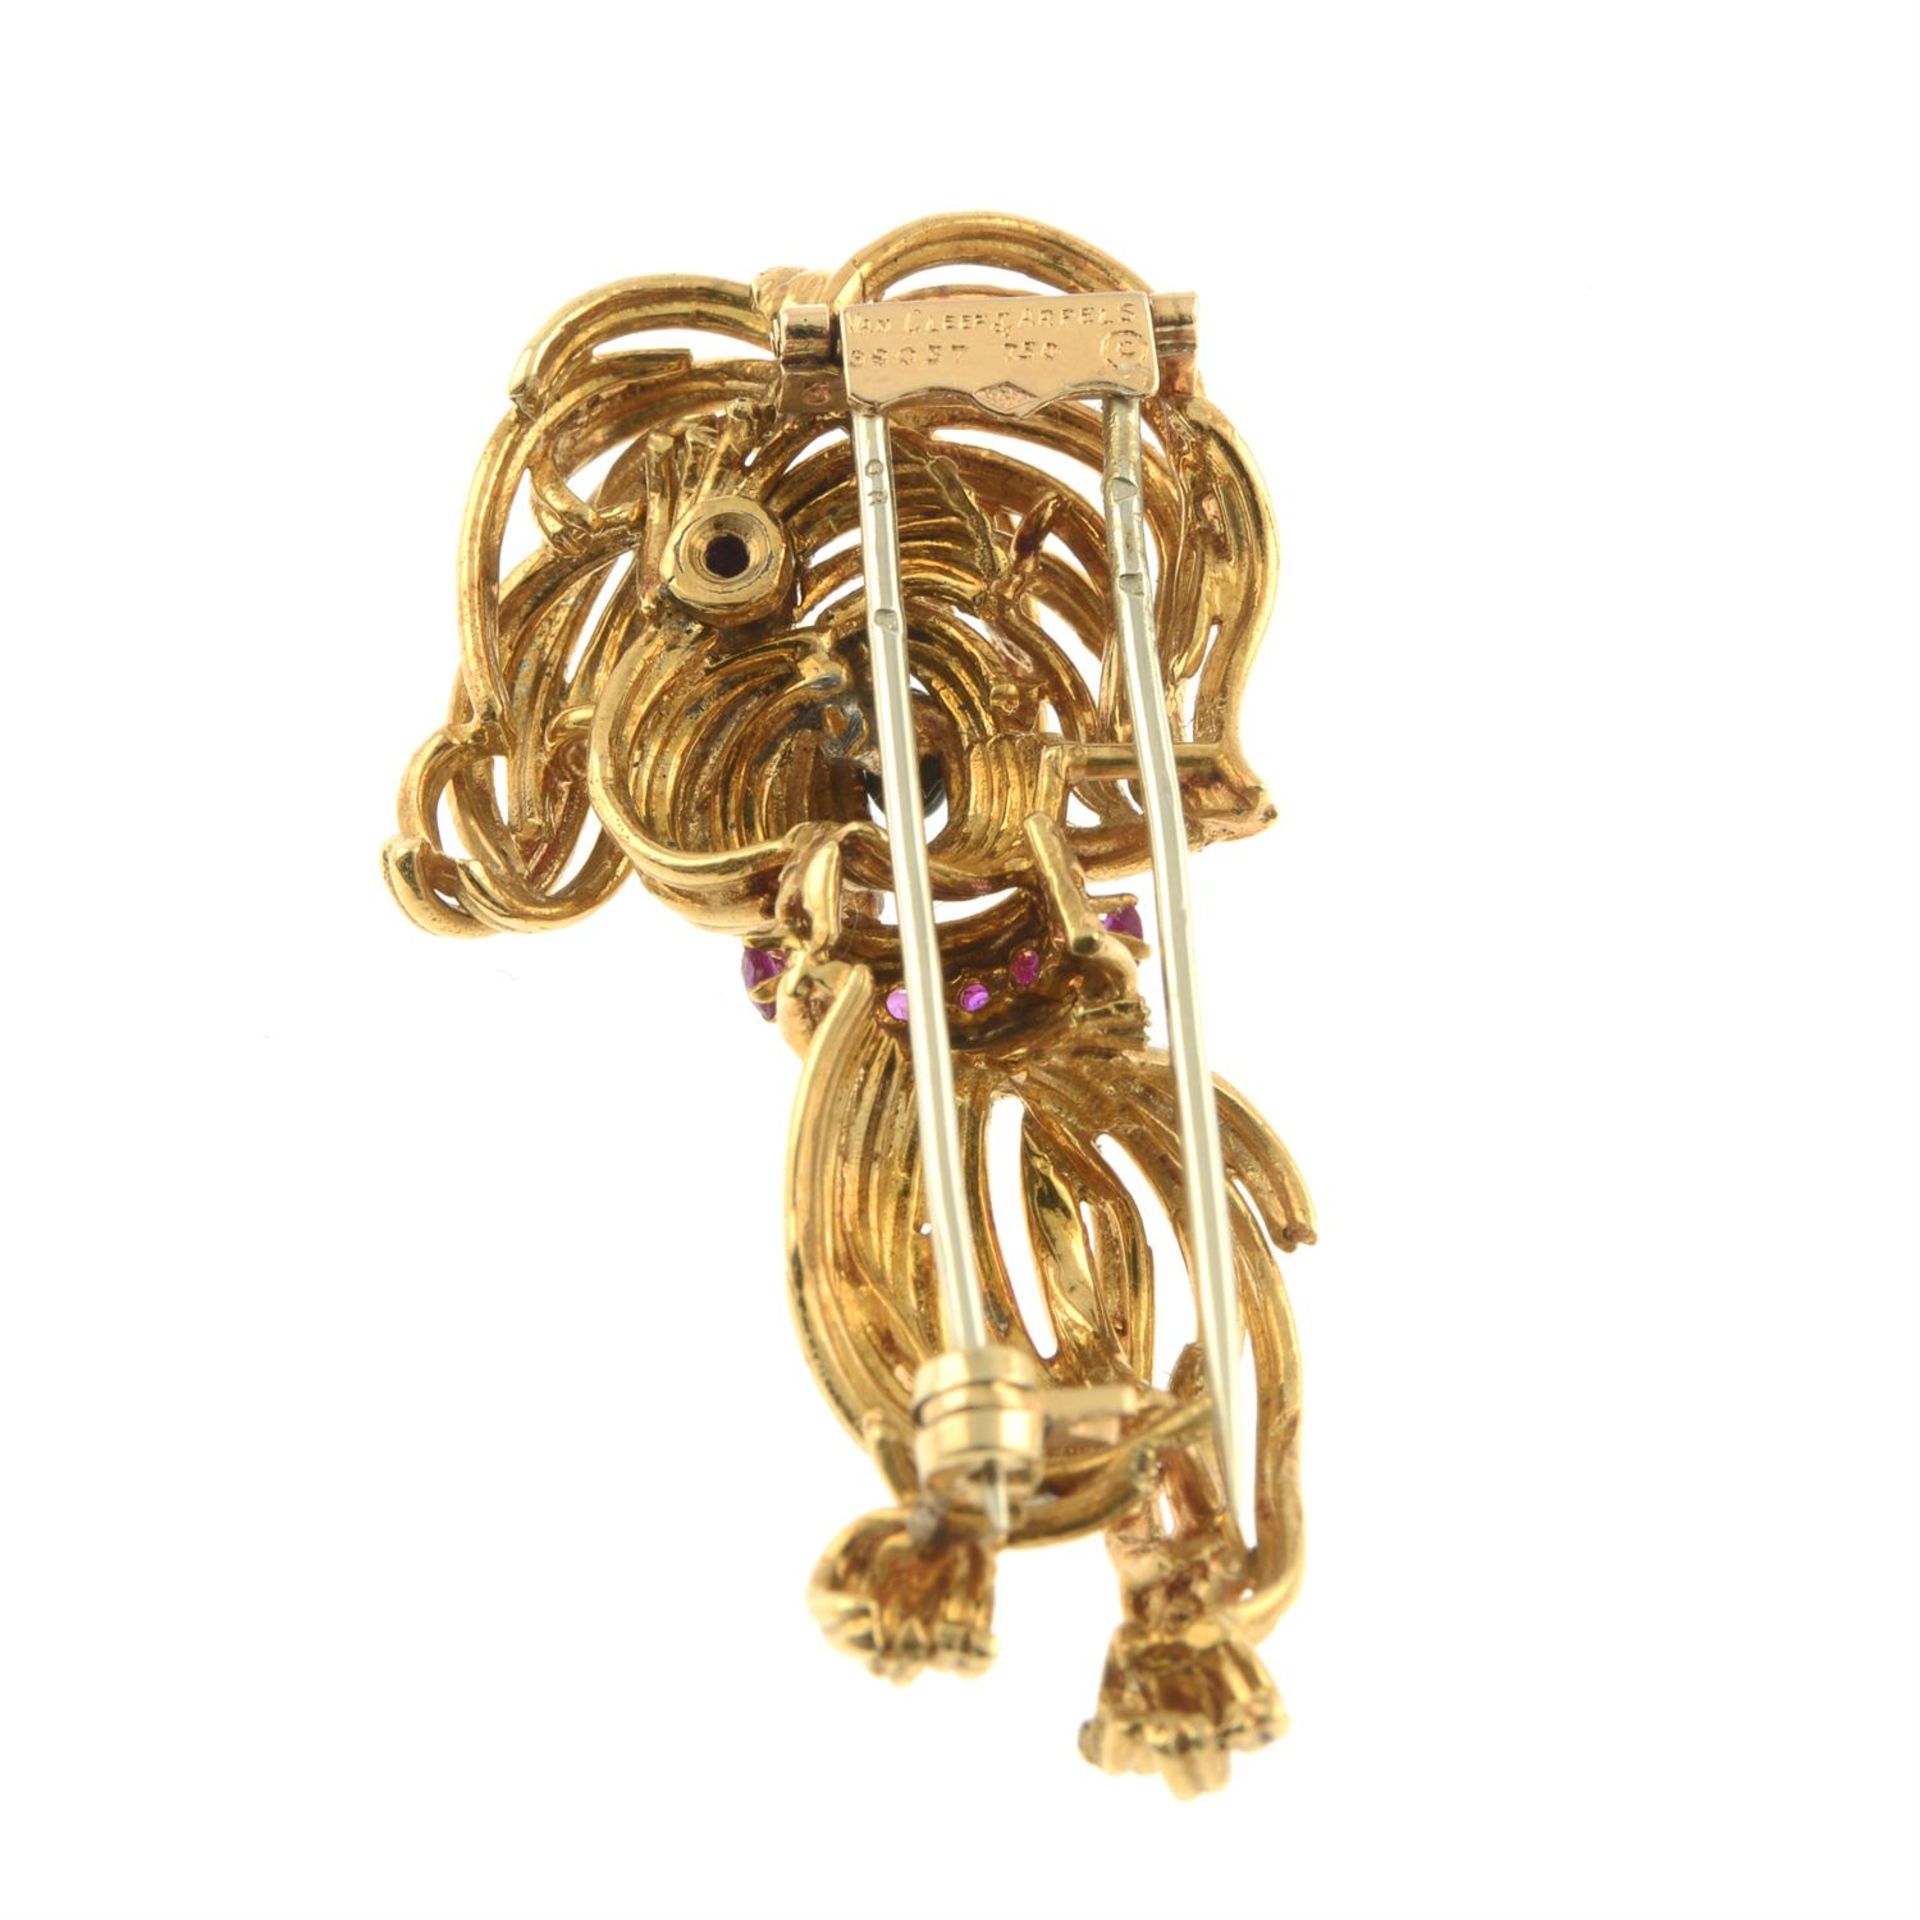 A mid 20th century 18ct gold diamond, ruby and onyx highlight dog brooch, by Van Cleef & Arpels. - Image 3 of 4